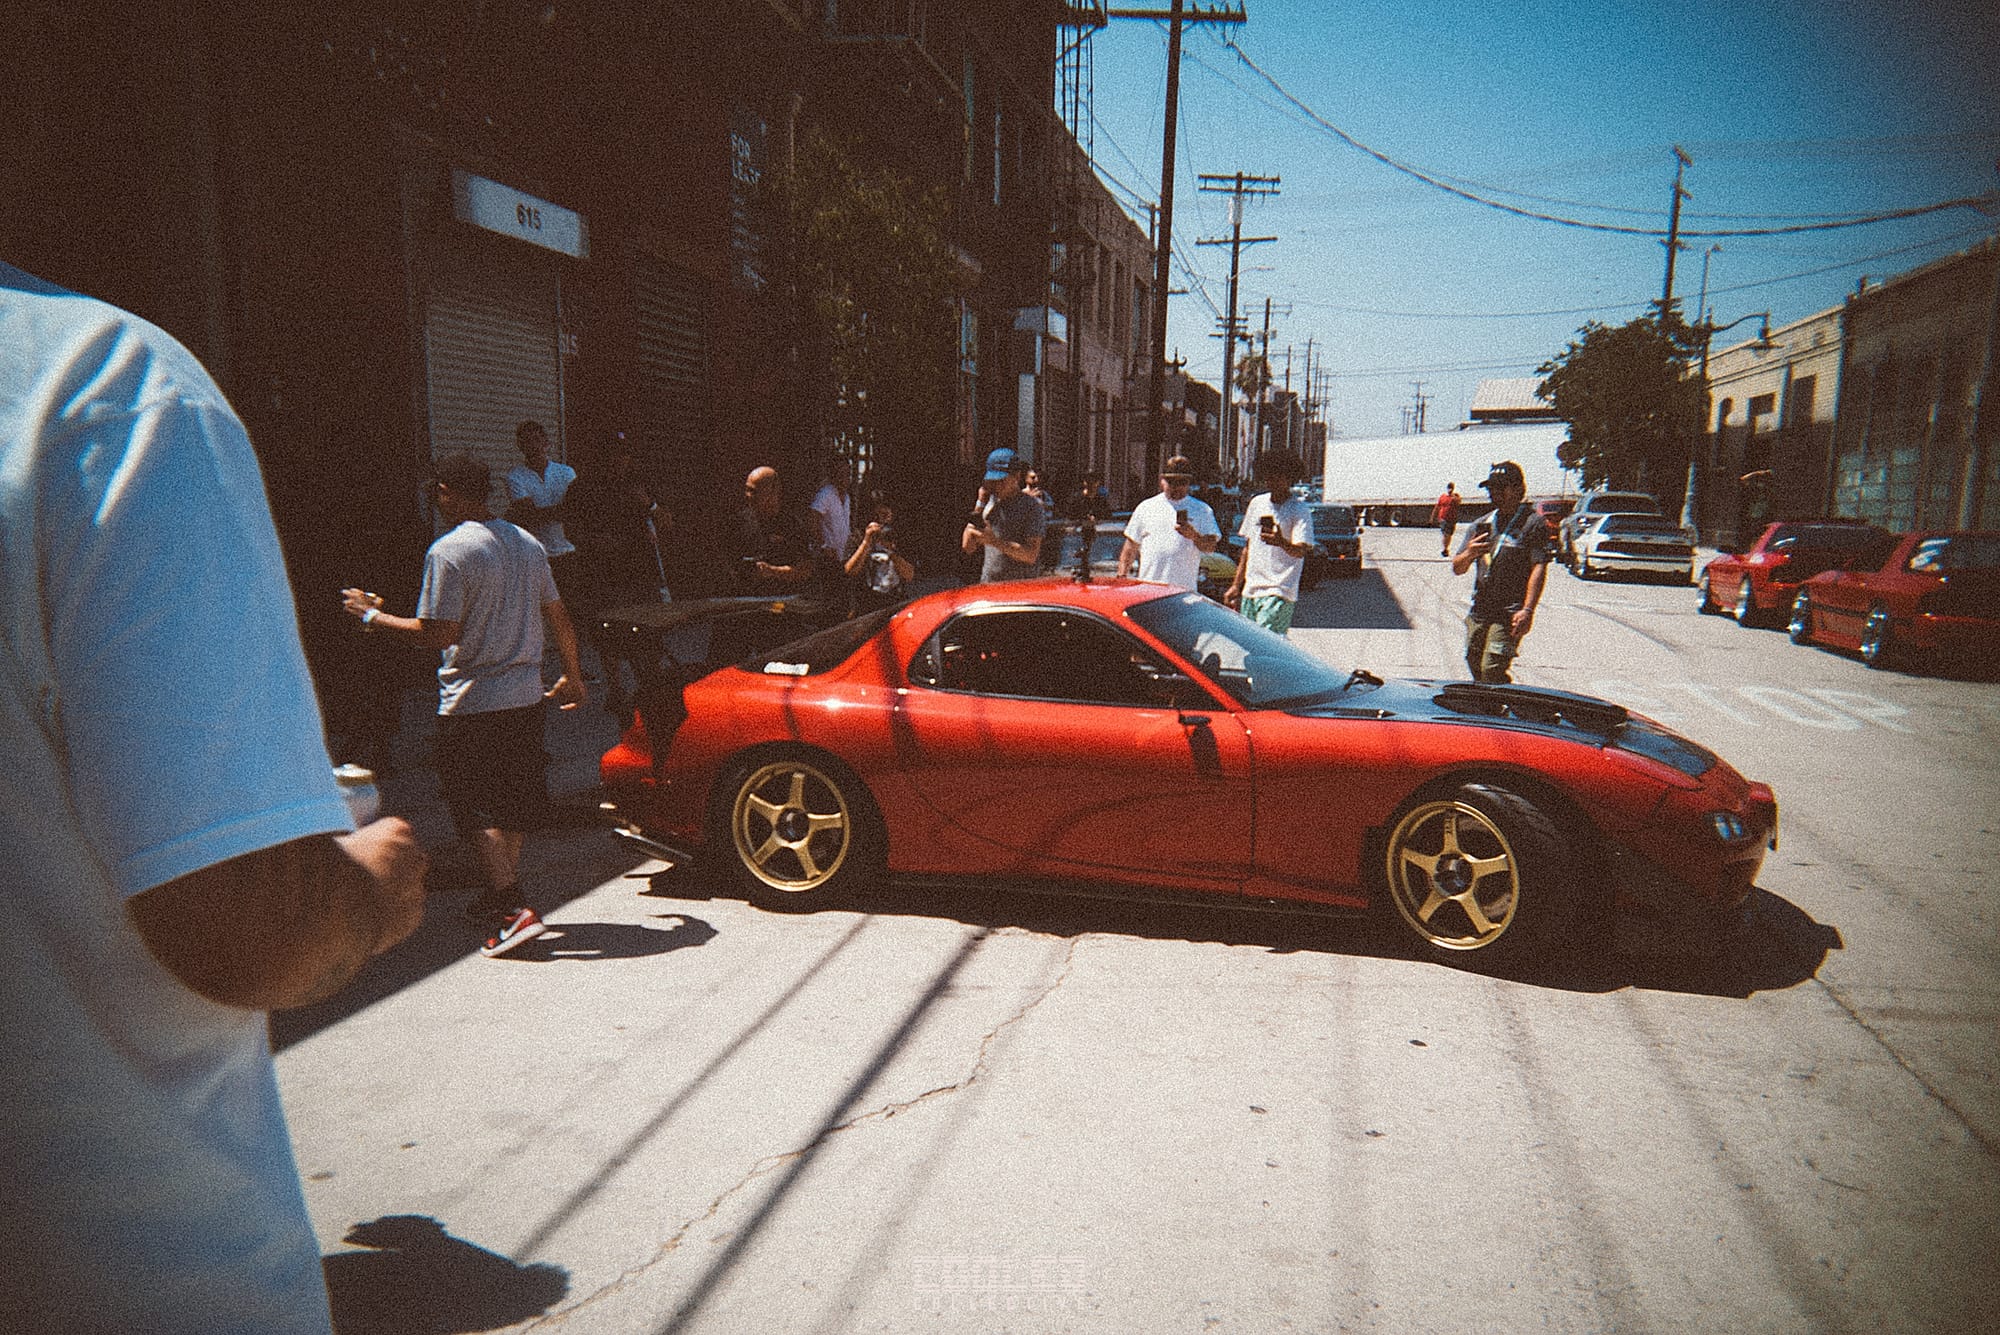 7's Day - Celebrating Rotary - Vintage Japanese Motor Union Downtown Los Angeles